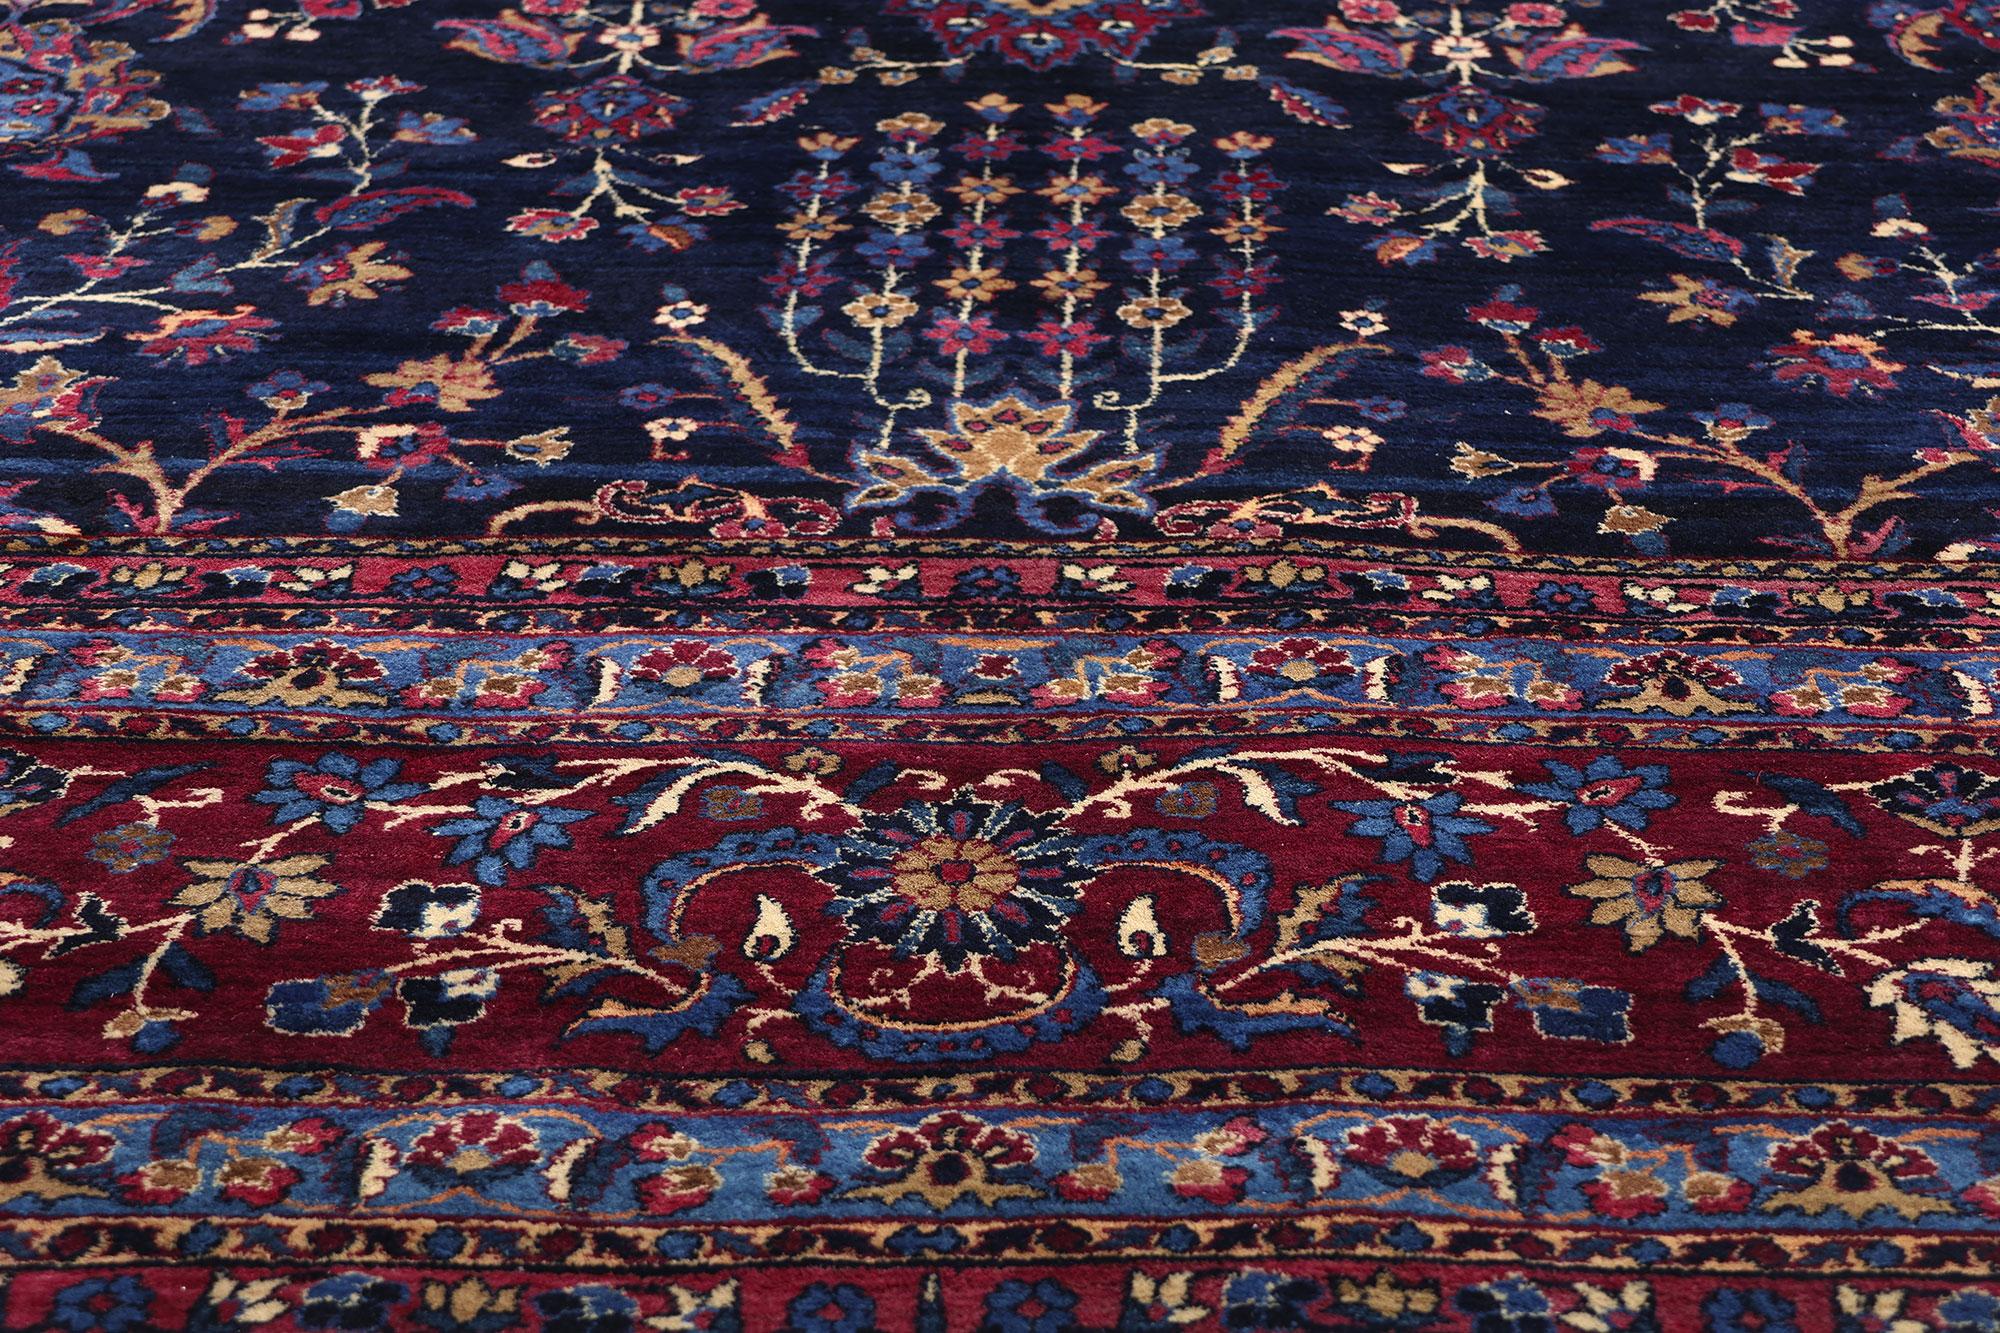 Vintage Navy Blue Persian Kerman Carpet, 11'09 x 15'05 In Good Condition For Sale In Dallas, TX